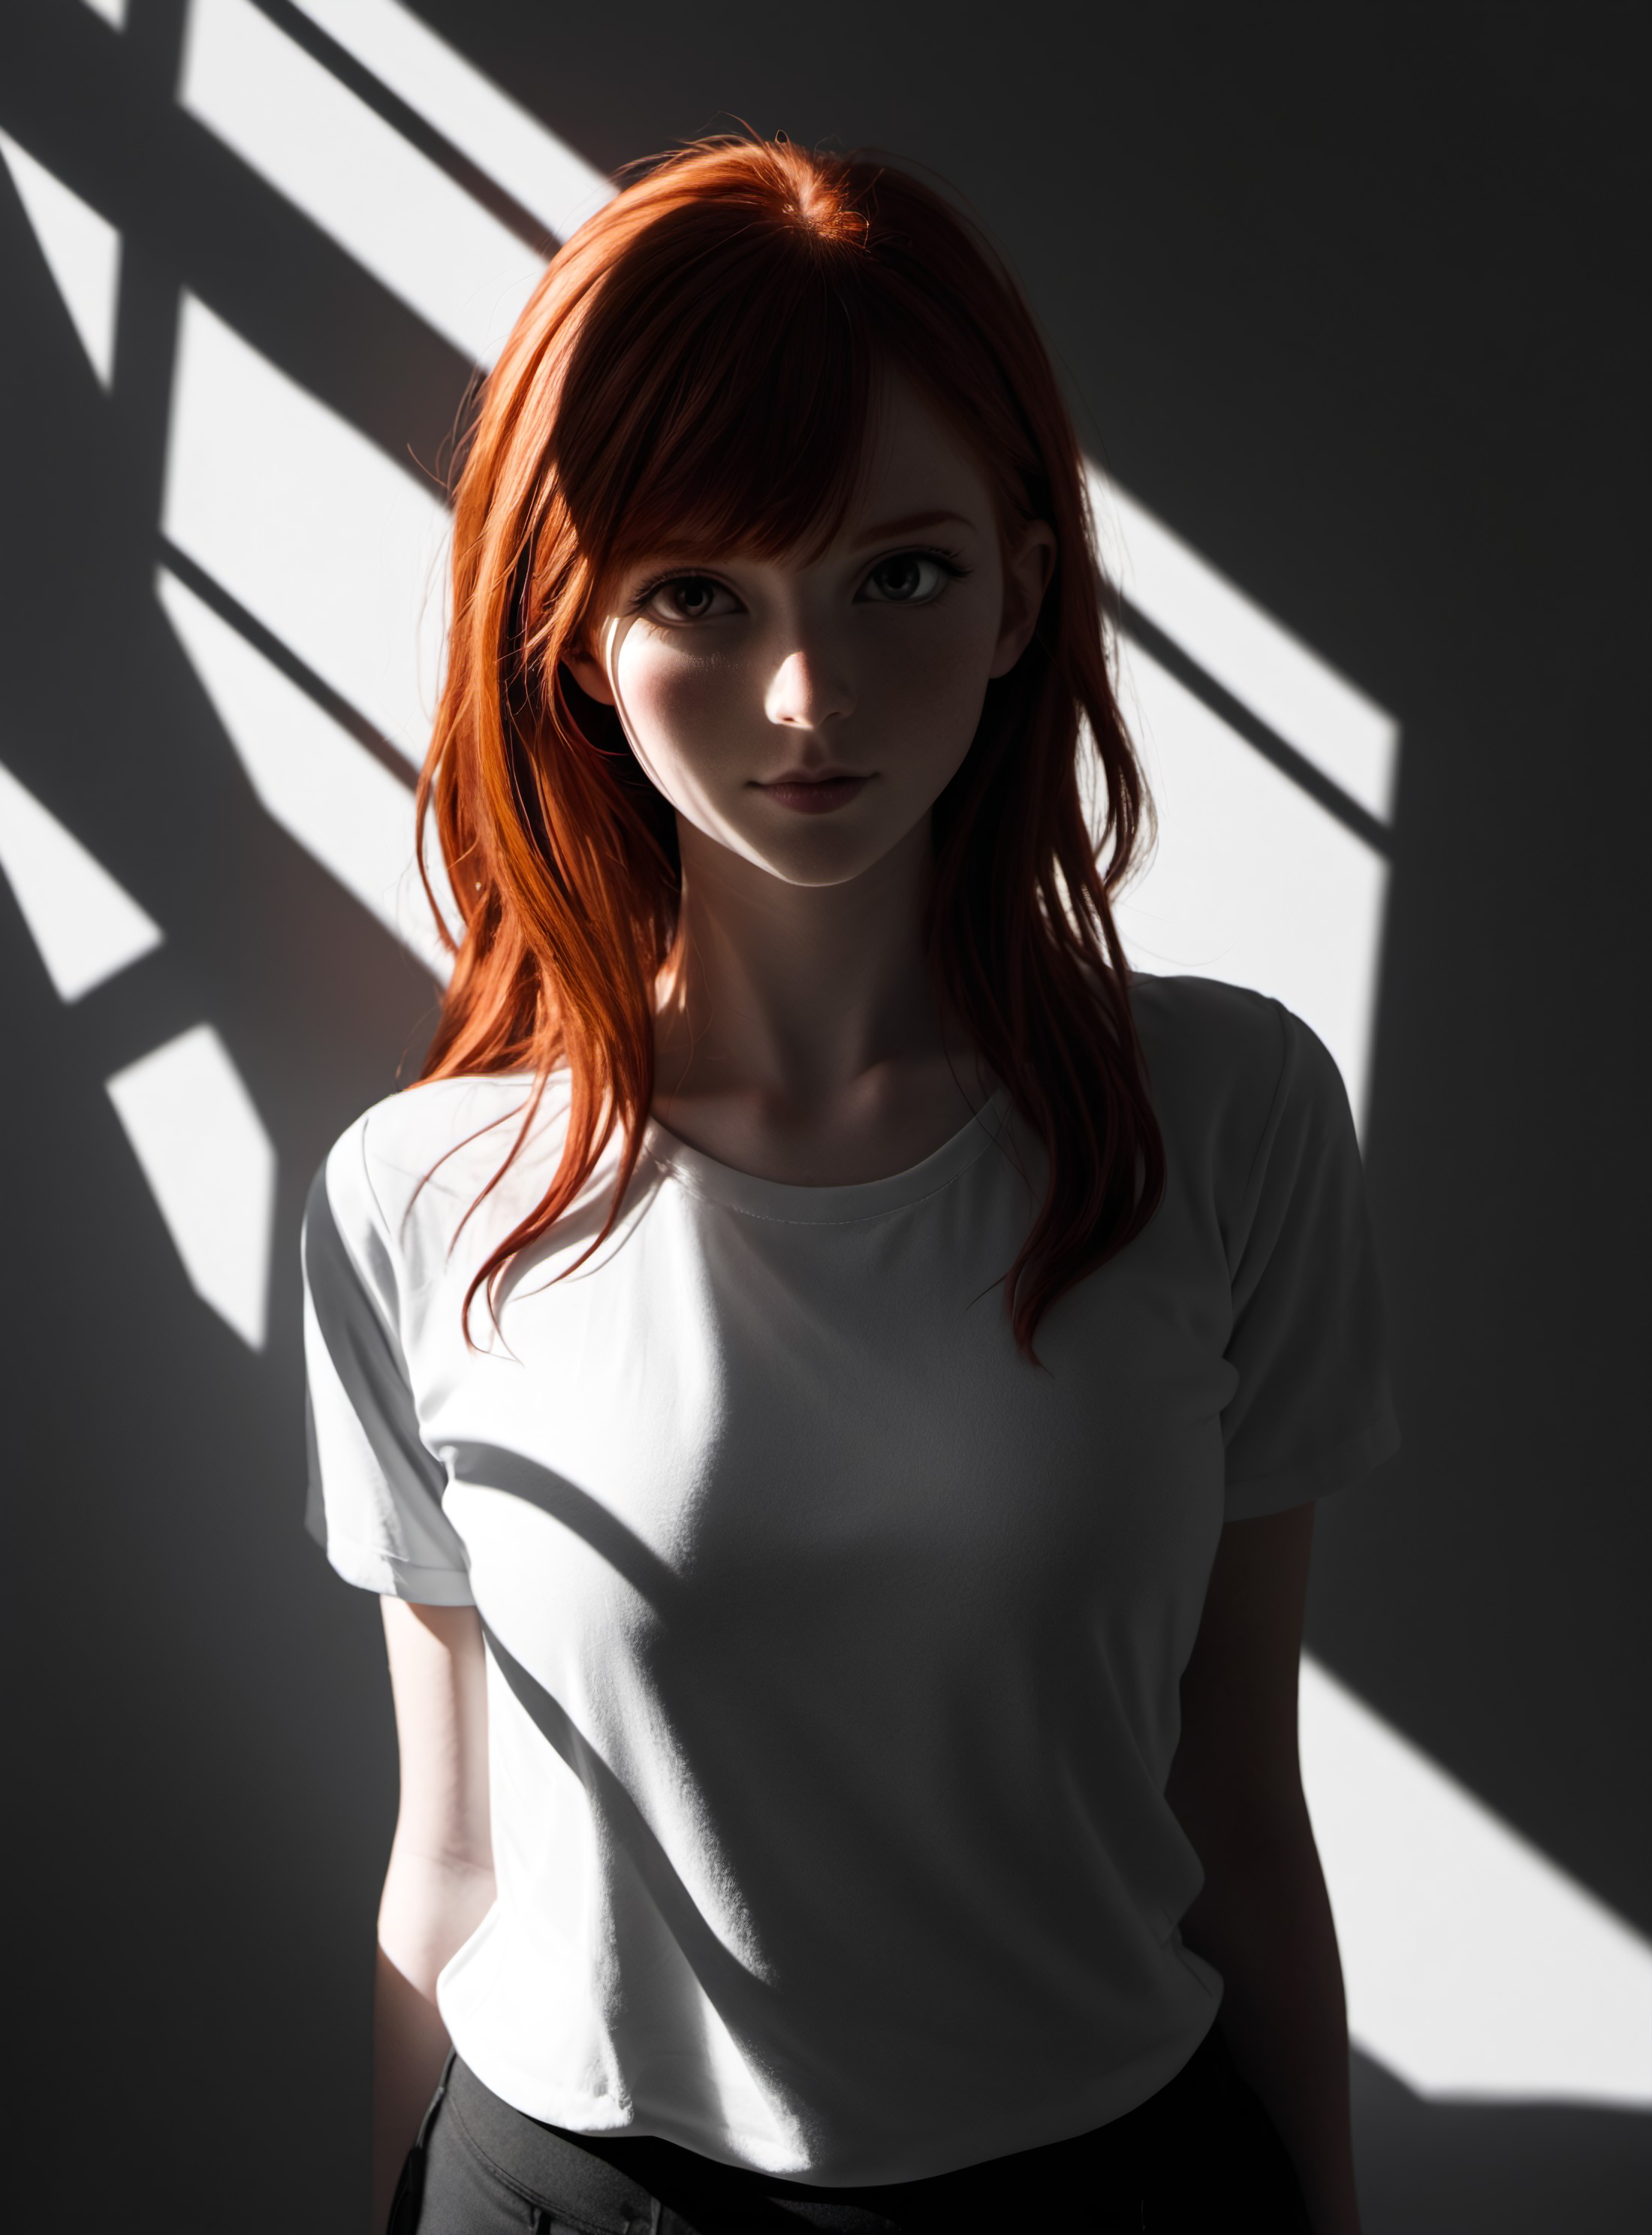 redhead girl, light contrast, hard shadows,(photo)

\\ Made with ONE FOR ALL checkpoint by Chaos Experience @ https://civi...